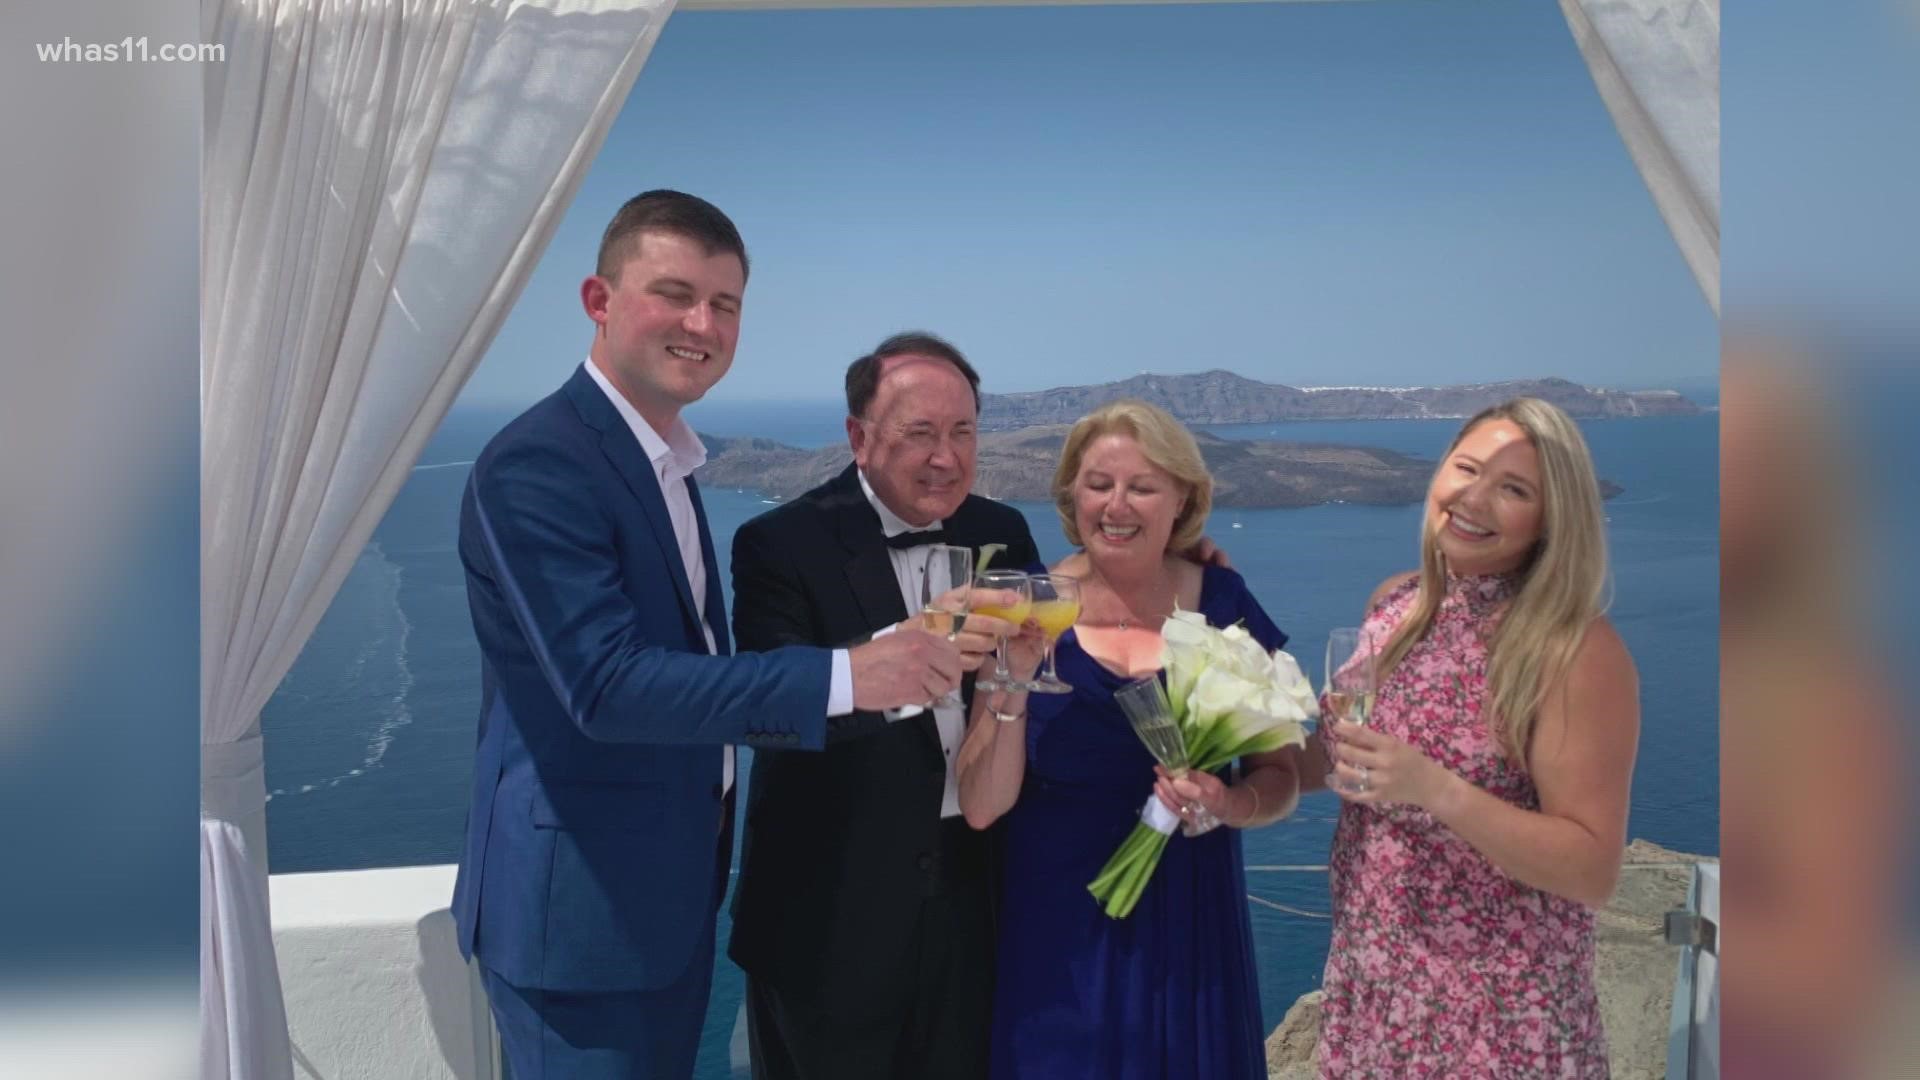 Congratulations to our very own Reed Yadon, who married his wife Jackie in Santorini, Greece today.